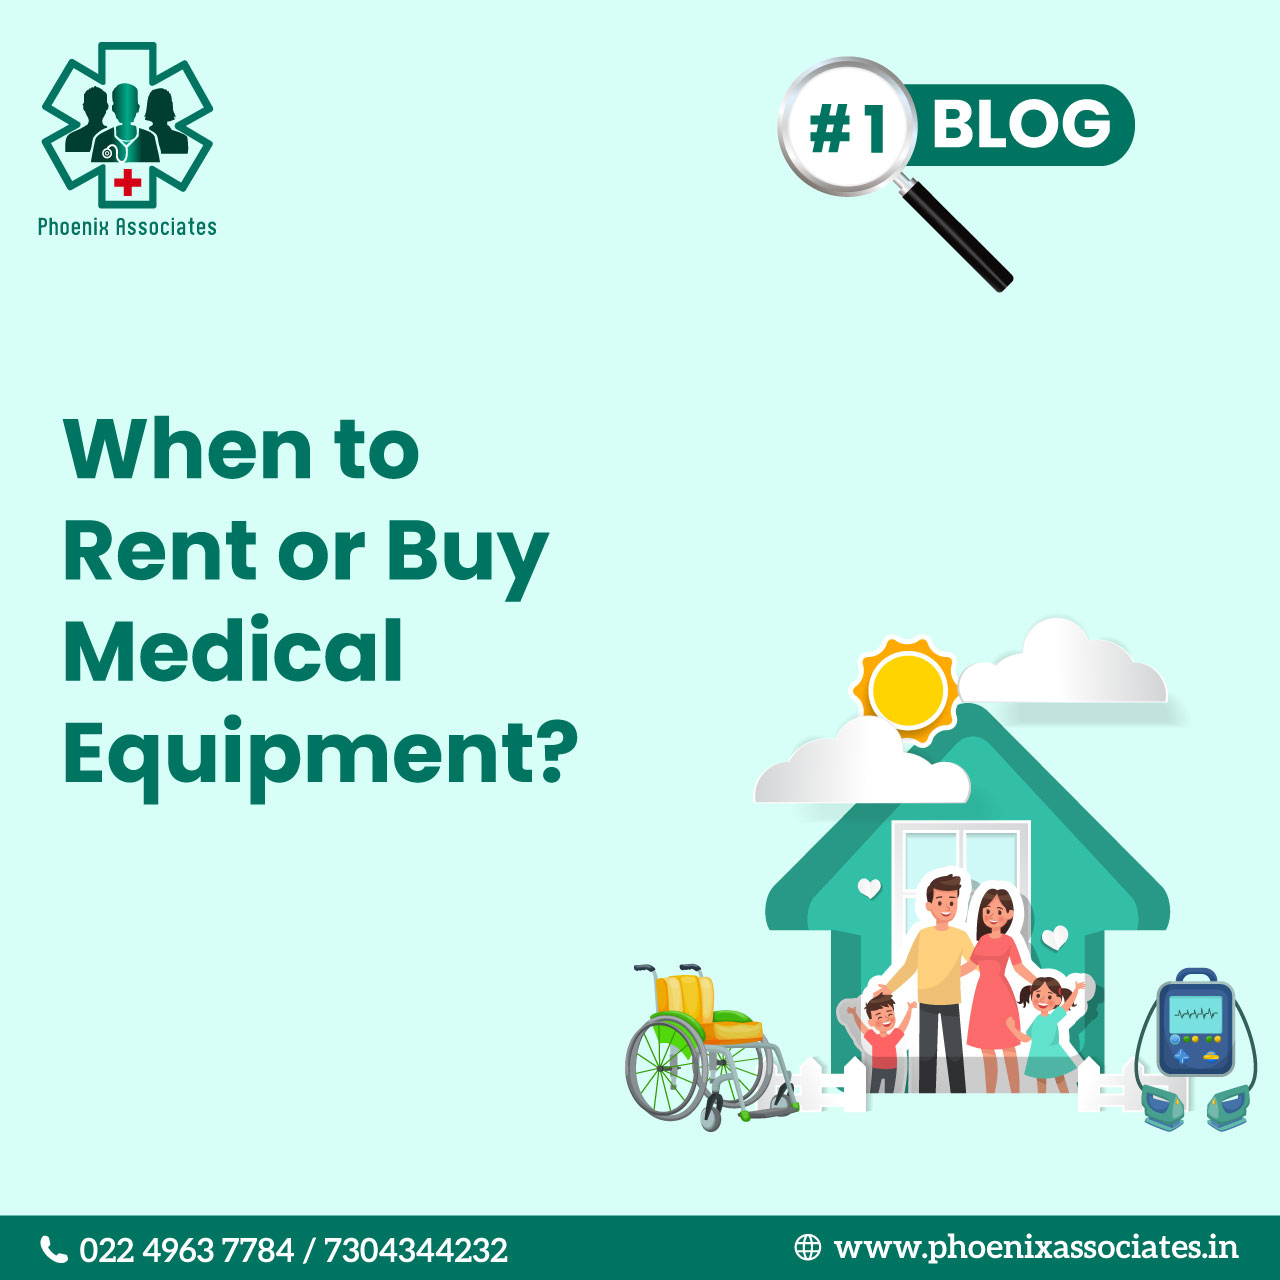 When to rent or buy medical equipment?